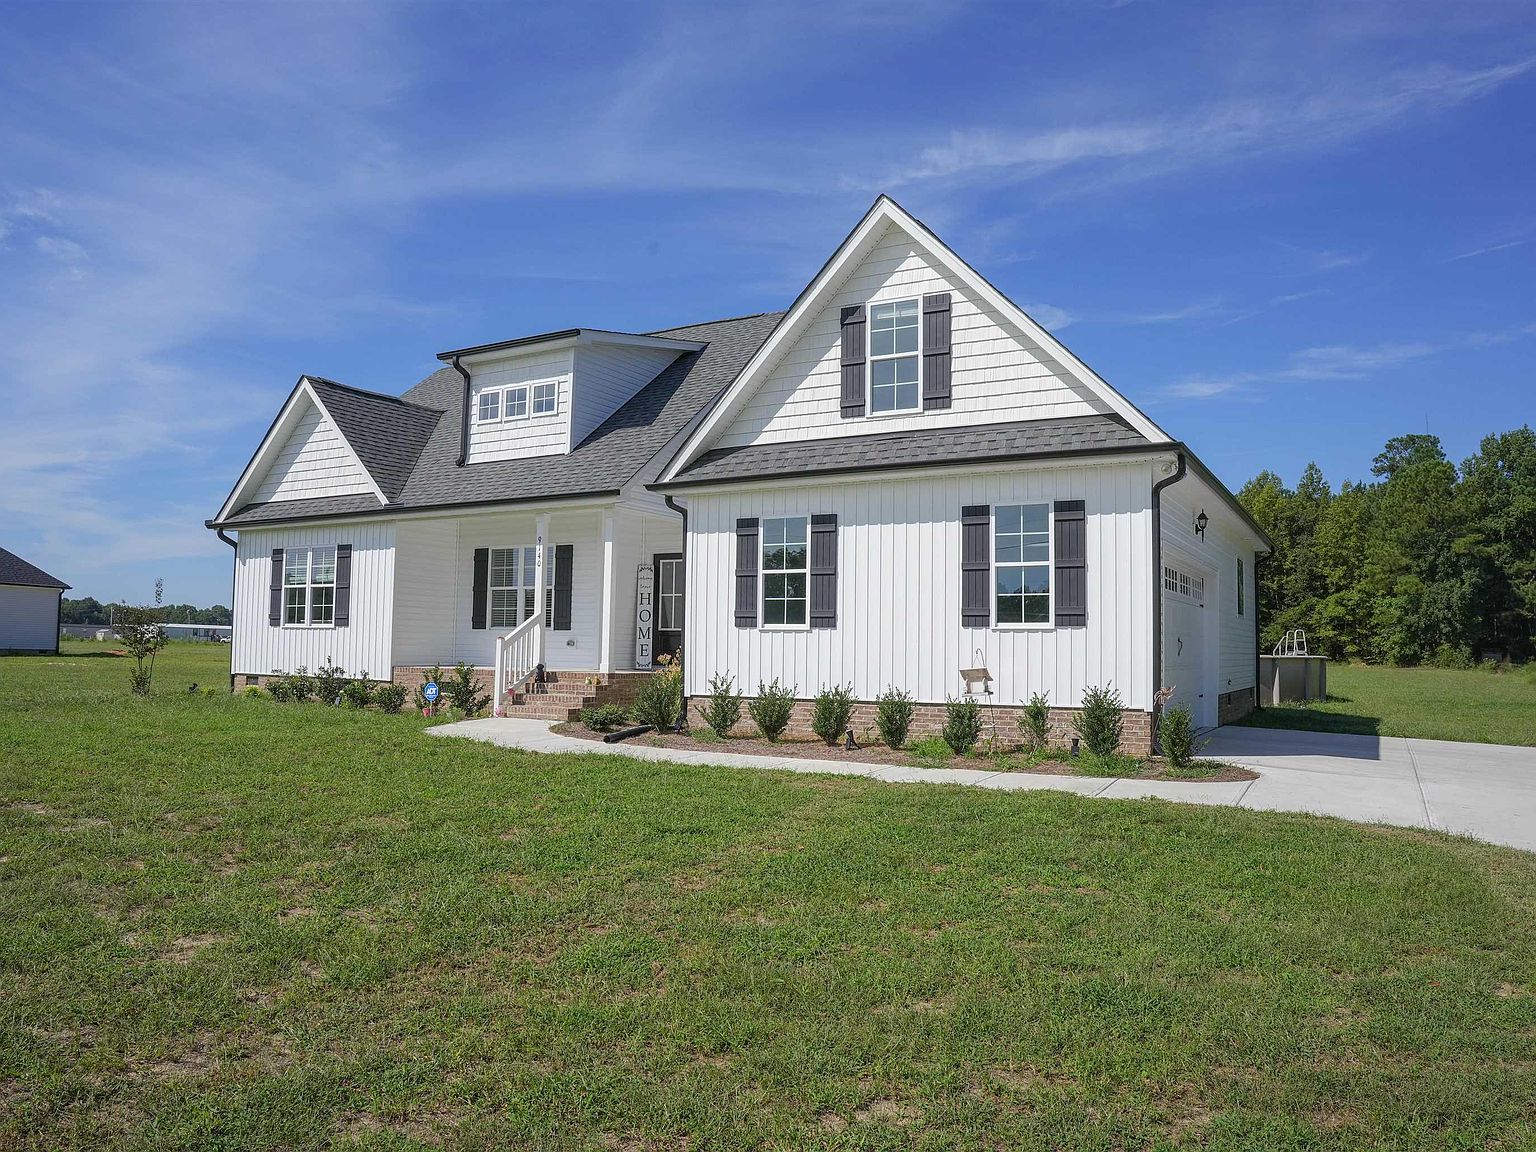 9140 State Highway 581, Bailey, NC 27807 | Zillow